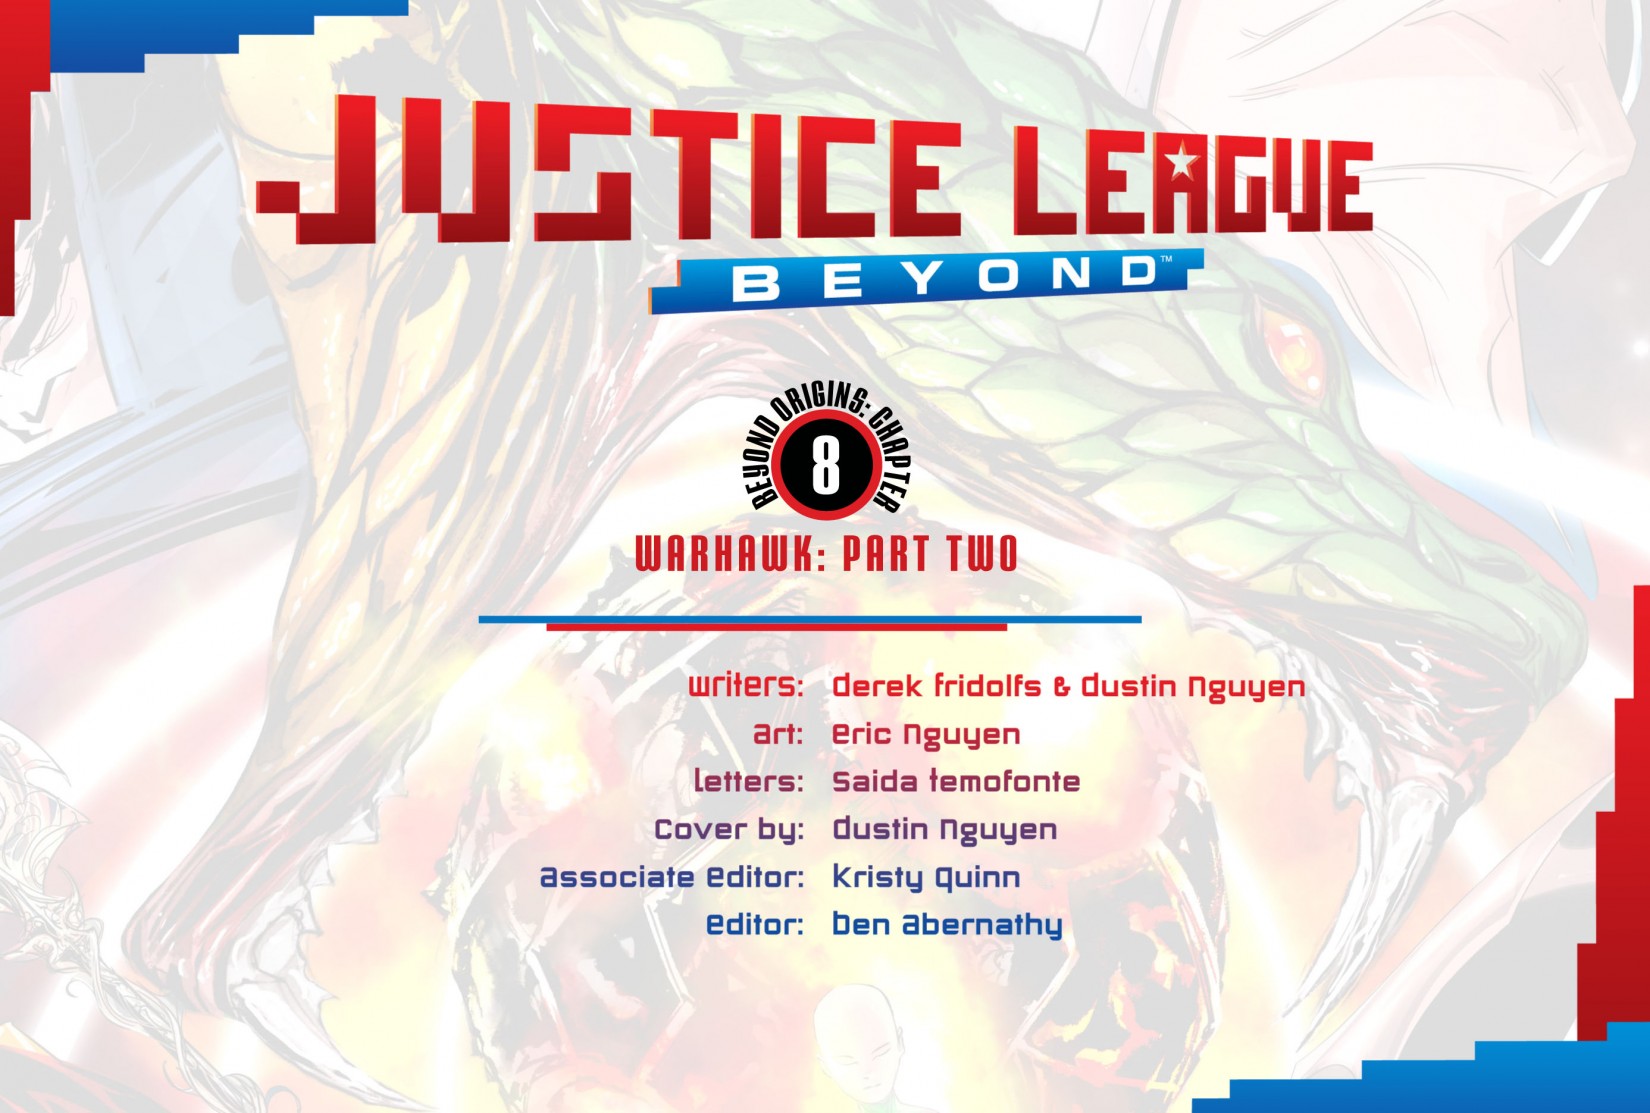 Read online Justice League Beyond comic -  Issue #8 - 2